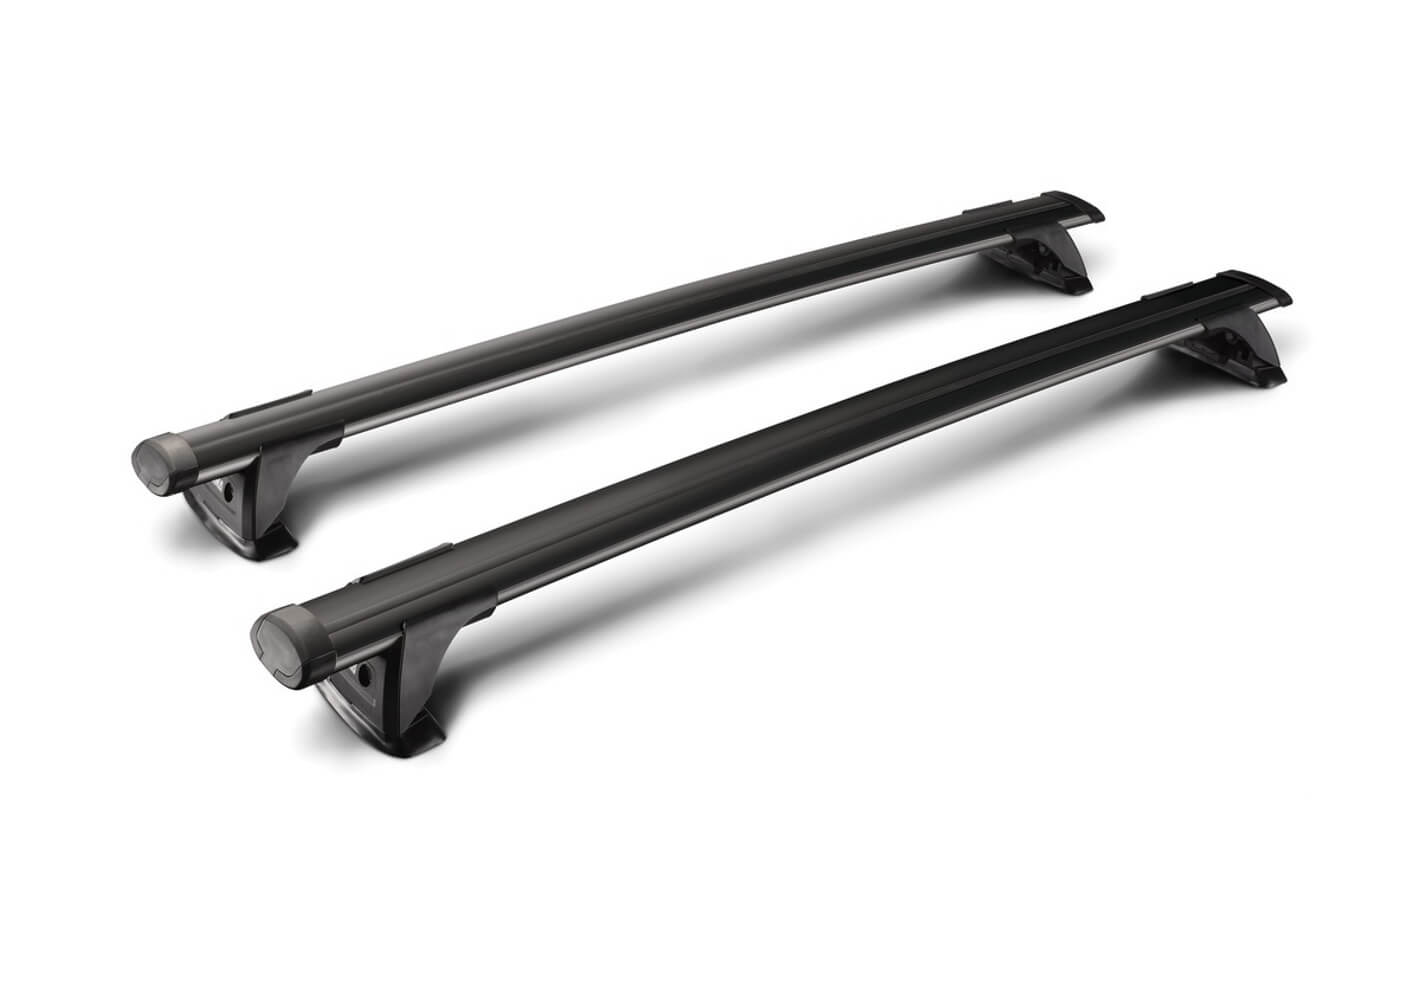 Fiat Doblo L1 (SWB) H1 (low roof) (2000 to 2010):Yakima roof bars package - S17B black bars with K337 kit